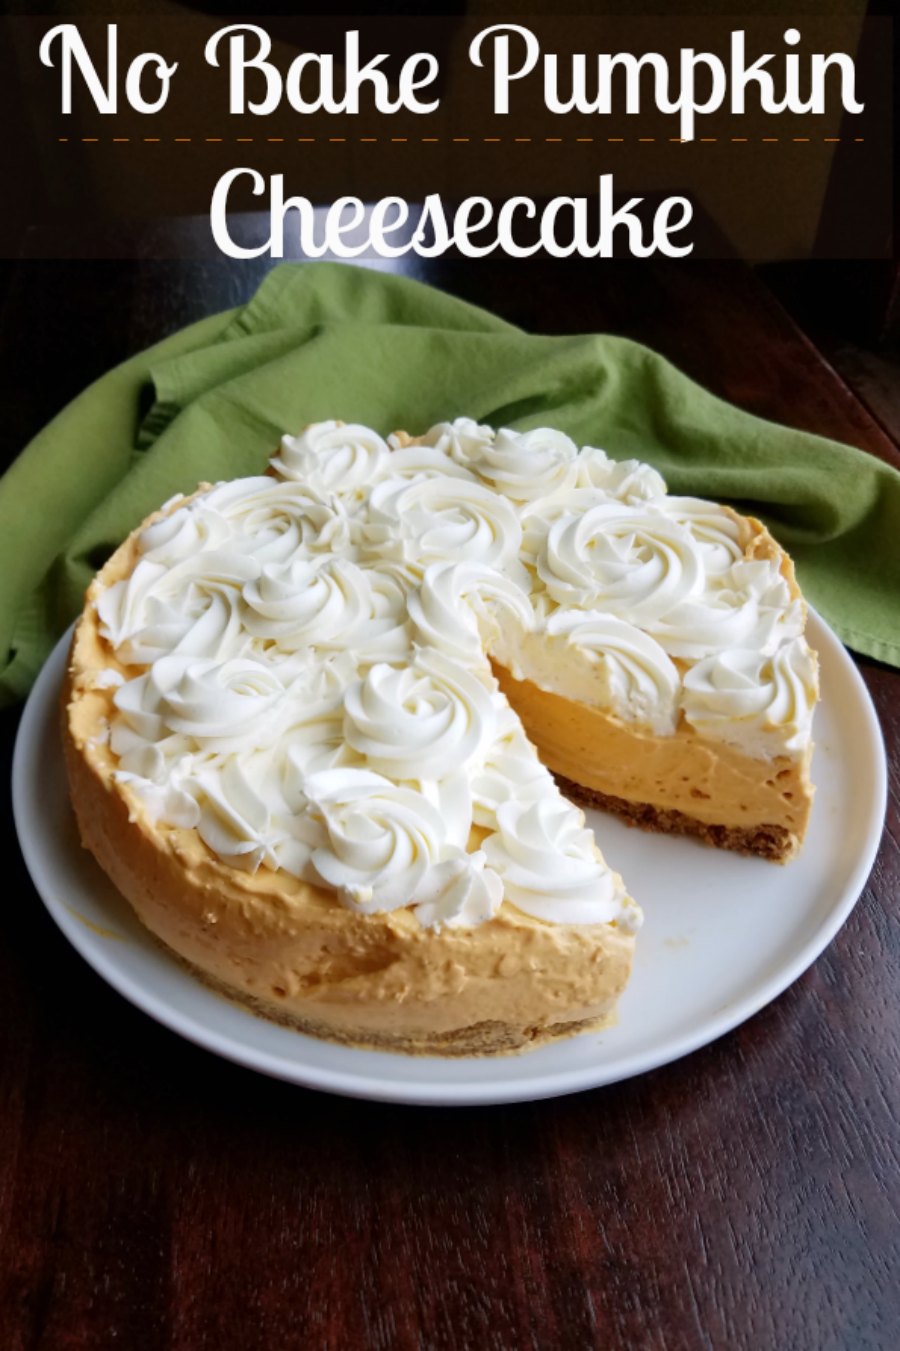 Soft and airy pumpkin filled no bake cheesecake is the perfect transitional fall dessert. It’s also great for the holidays when your oven is full of other things. It has a nice pumpkin spice roundness to it and the vanilla cheesecake topping takes it to the next level!